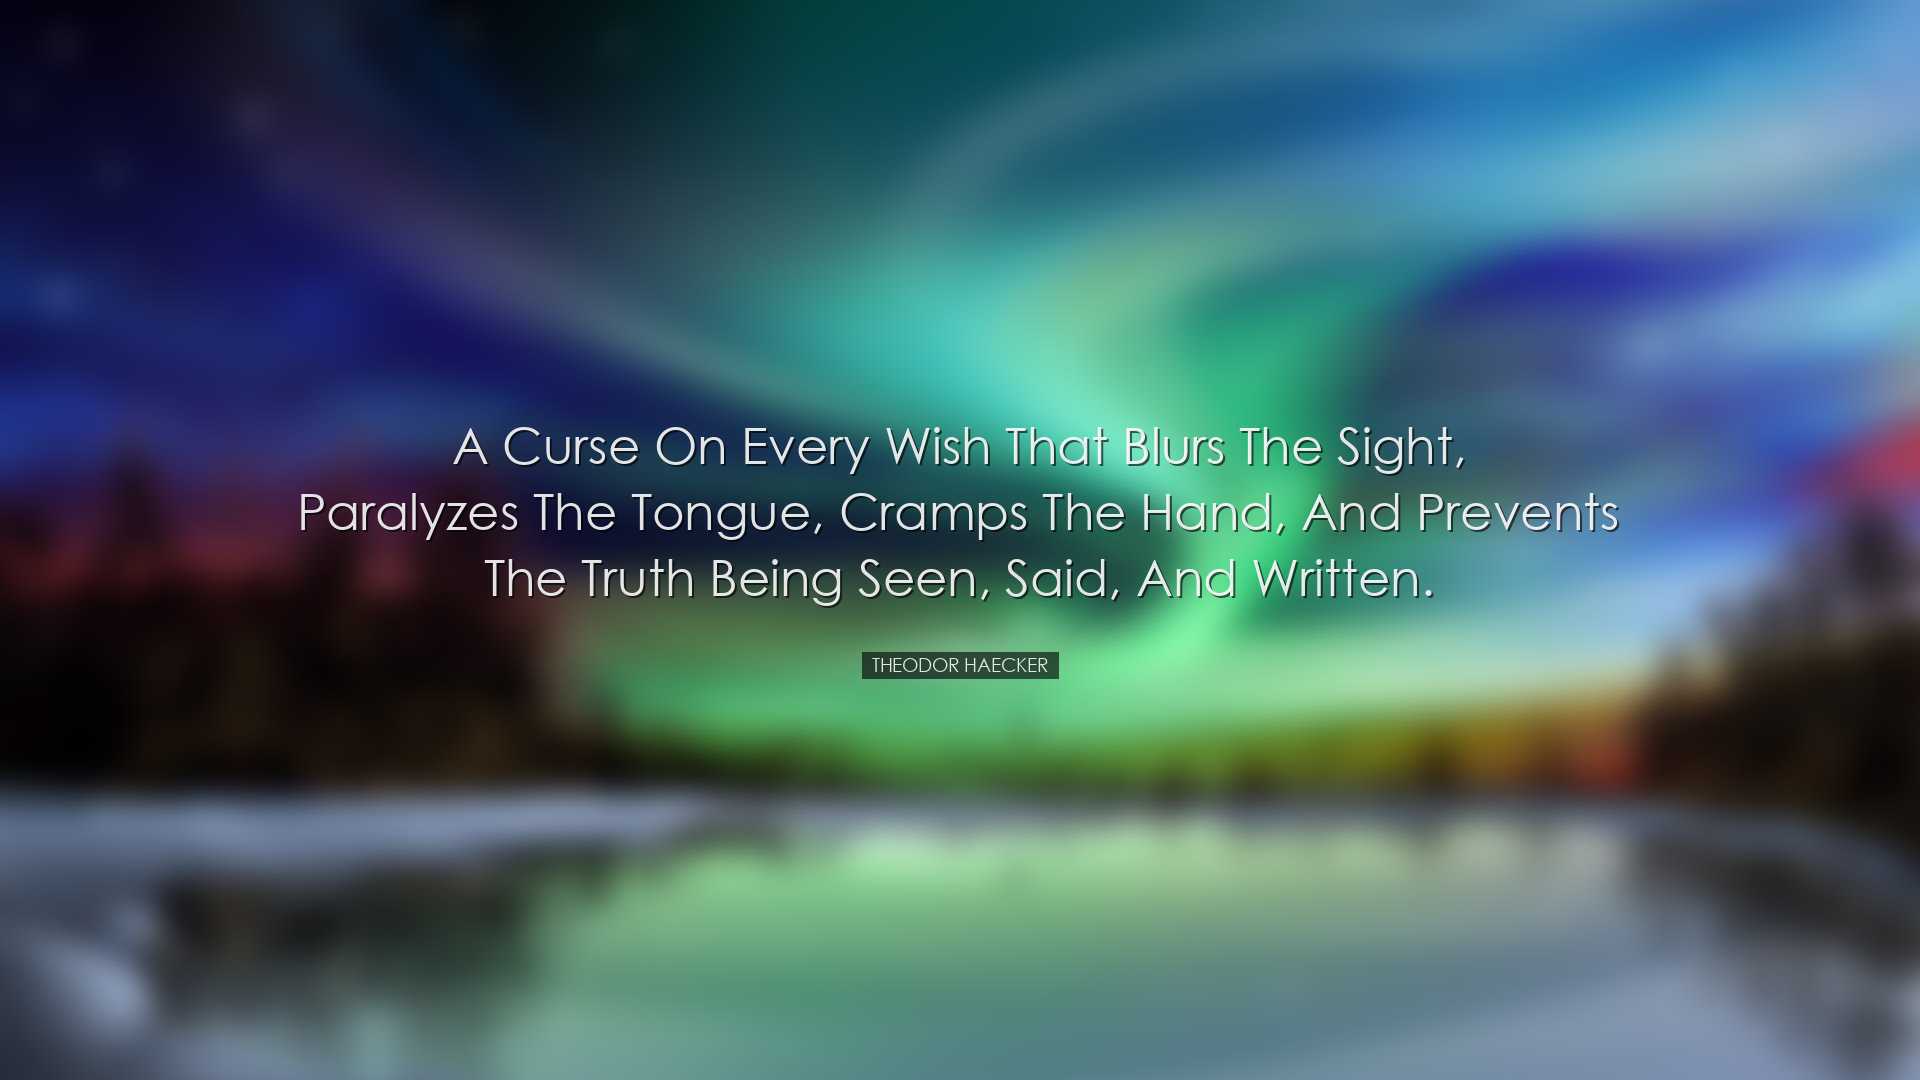 A curse on every wish that blurs the sight, paralyzes the tongue,